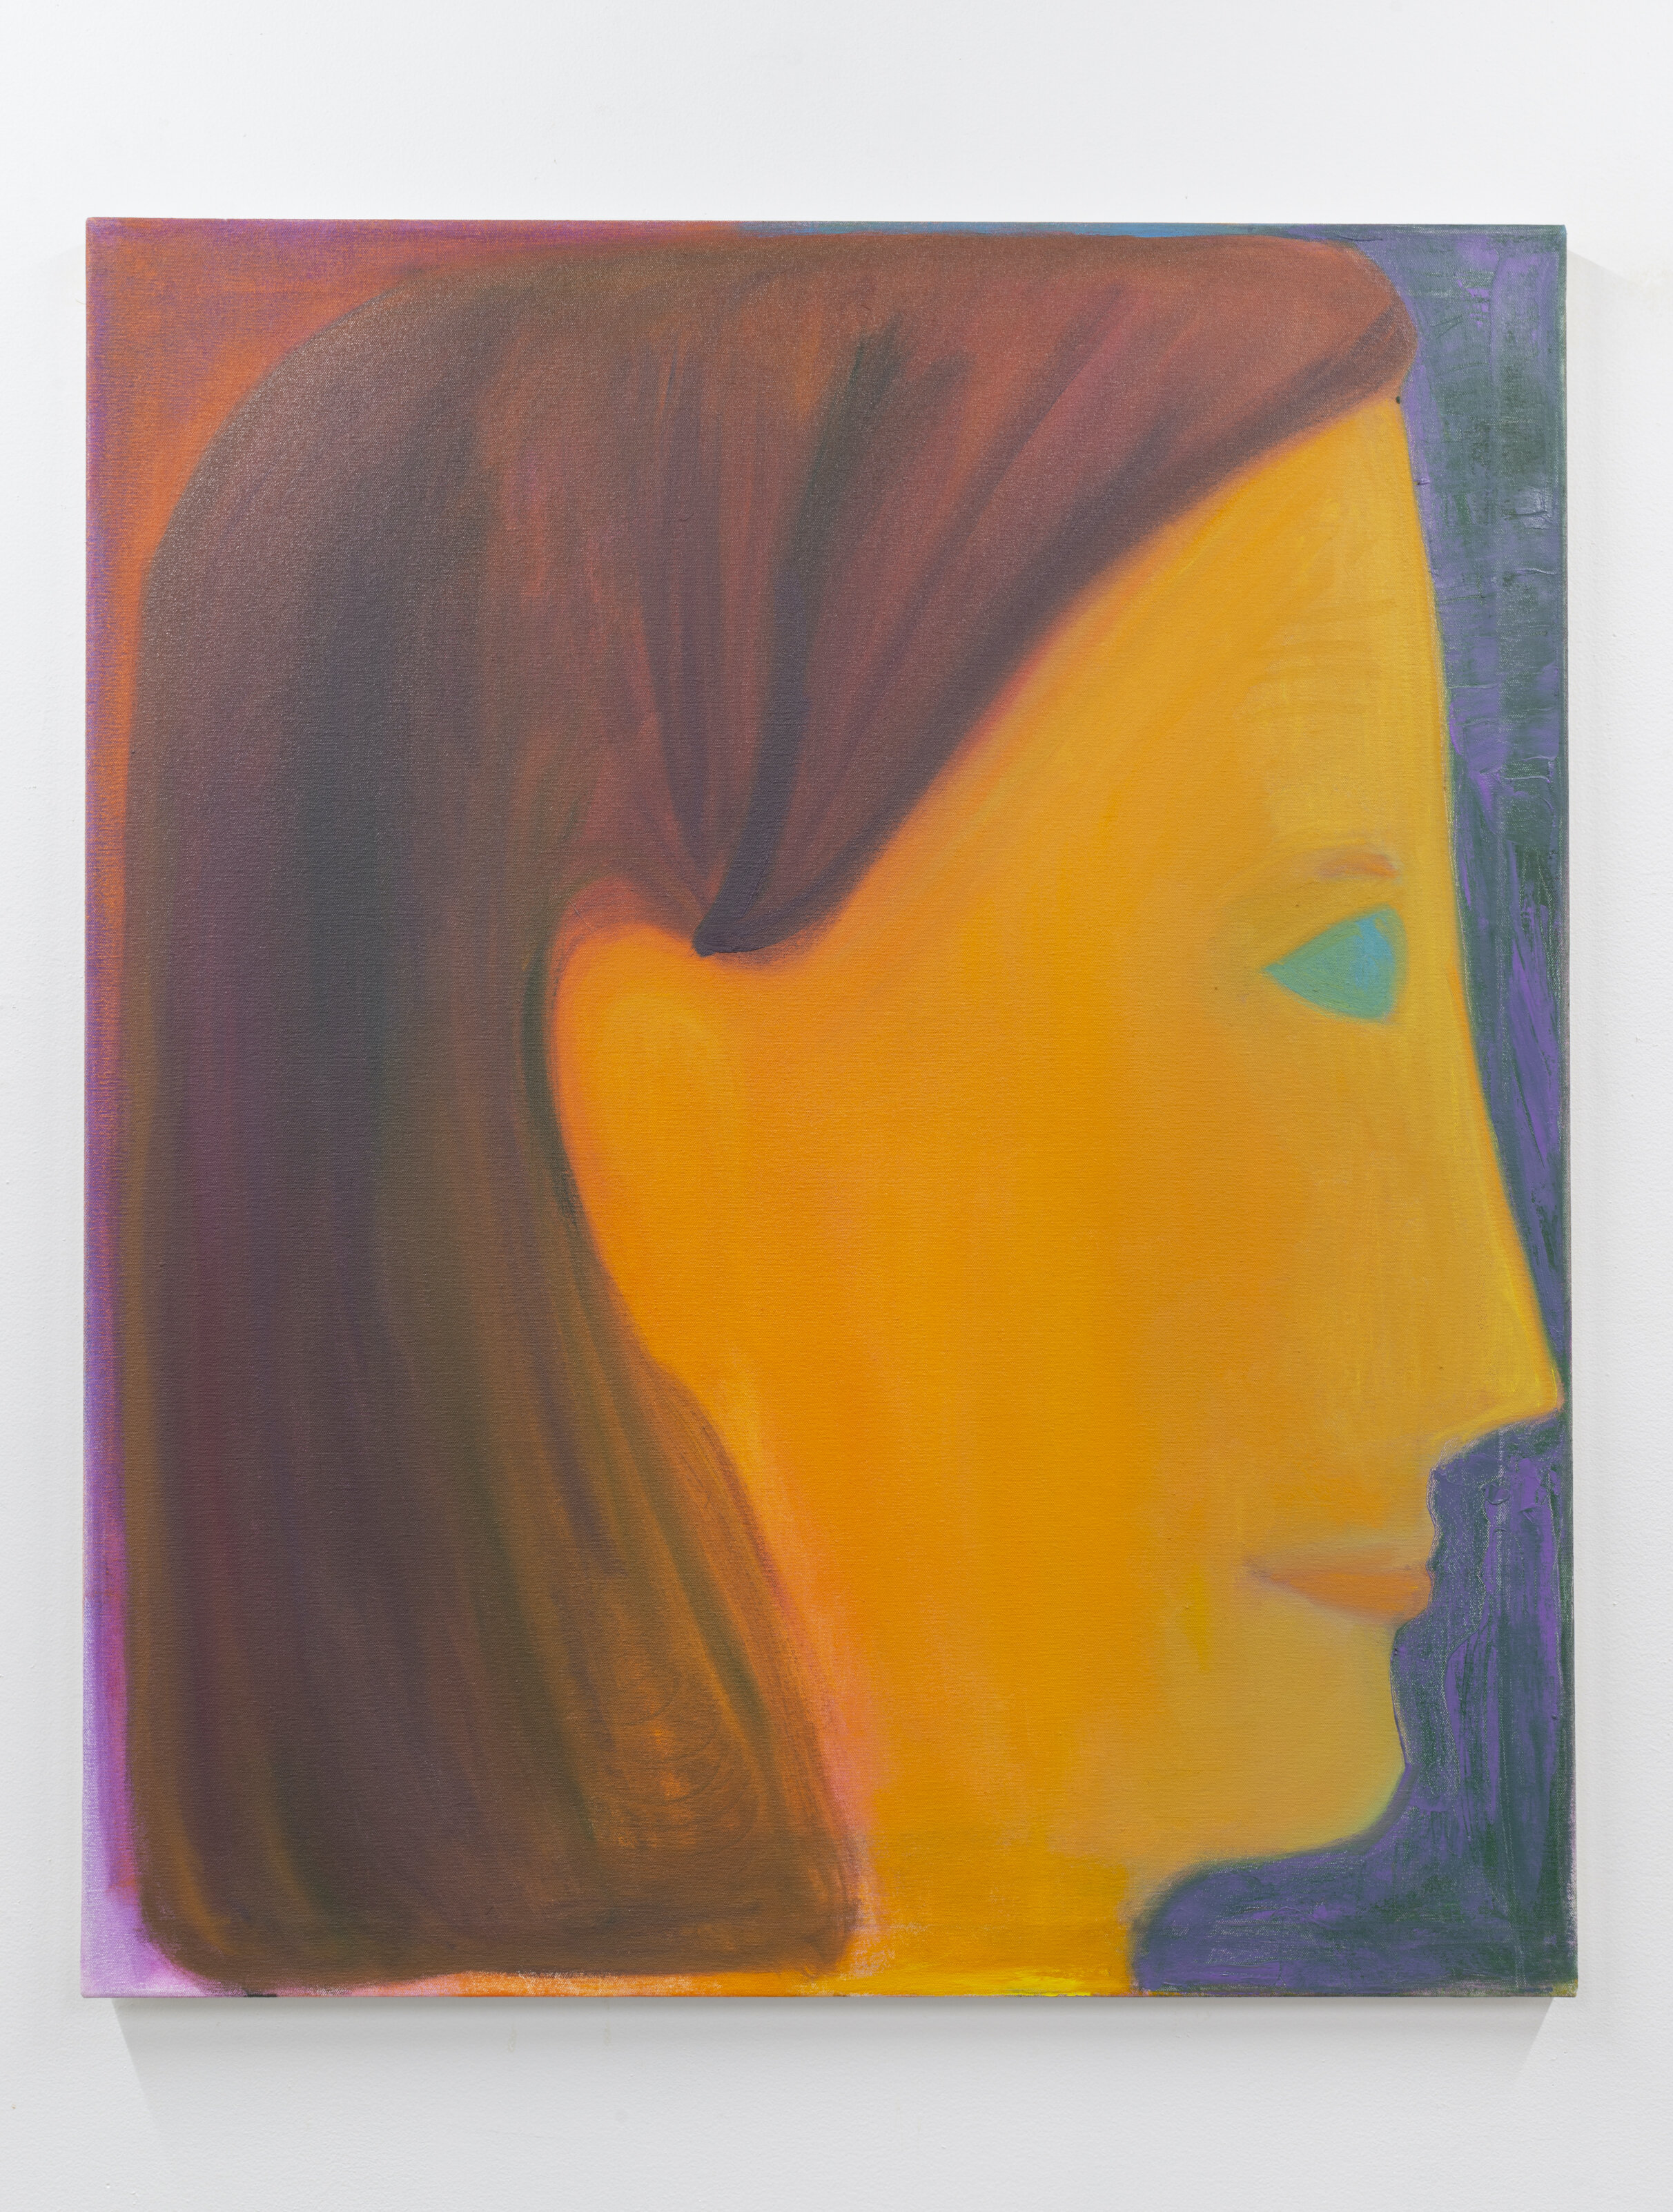  George Gittins,  Profile,  2019  Oil on canvas  37 x 31 inches  